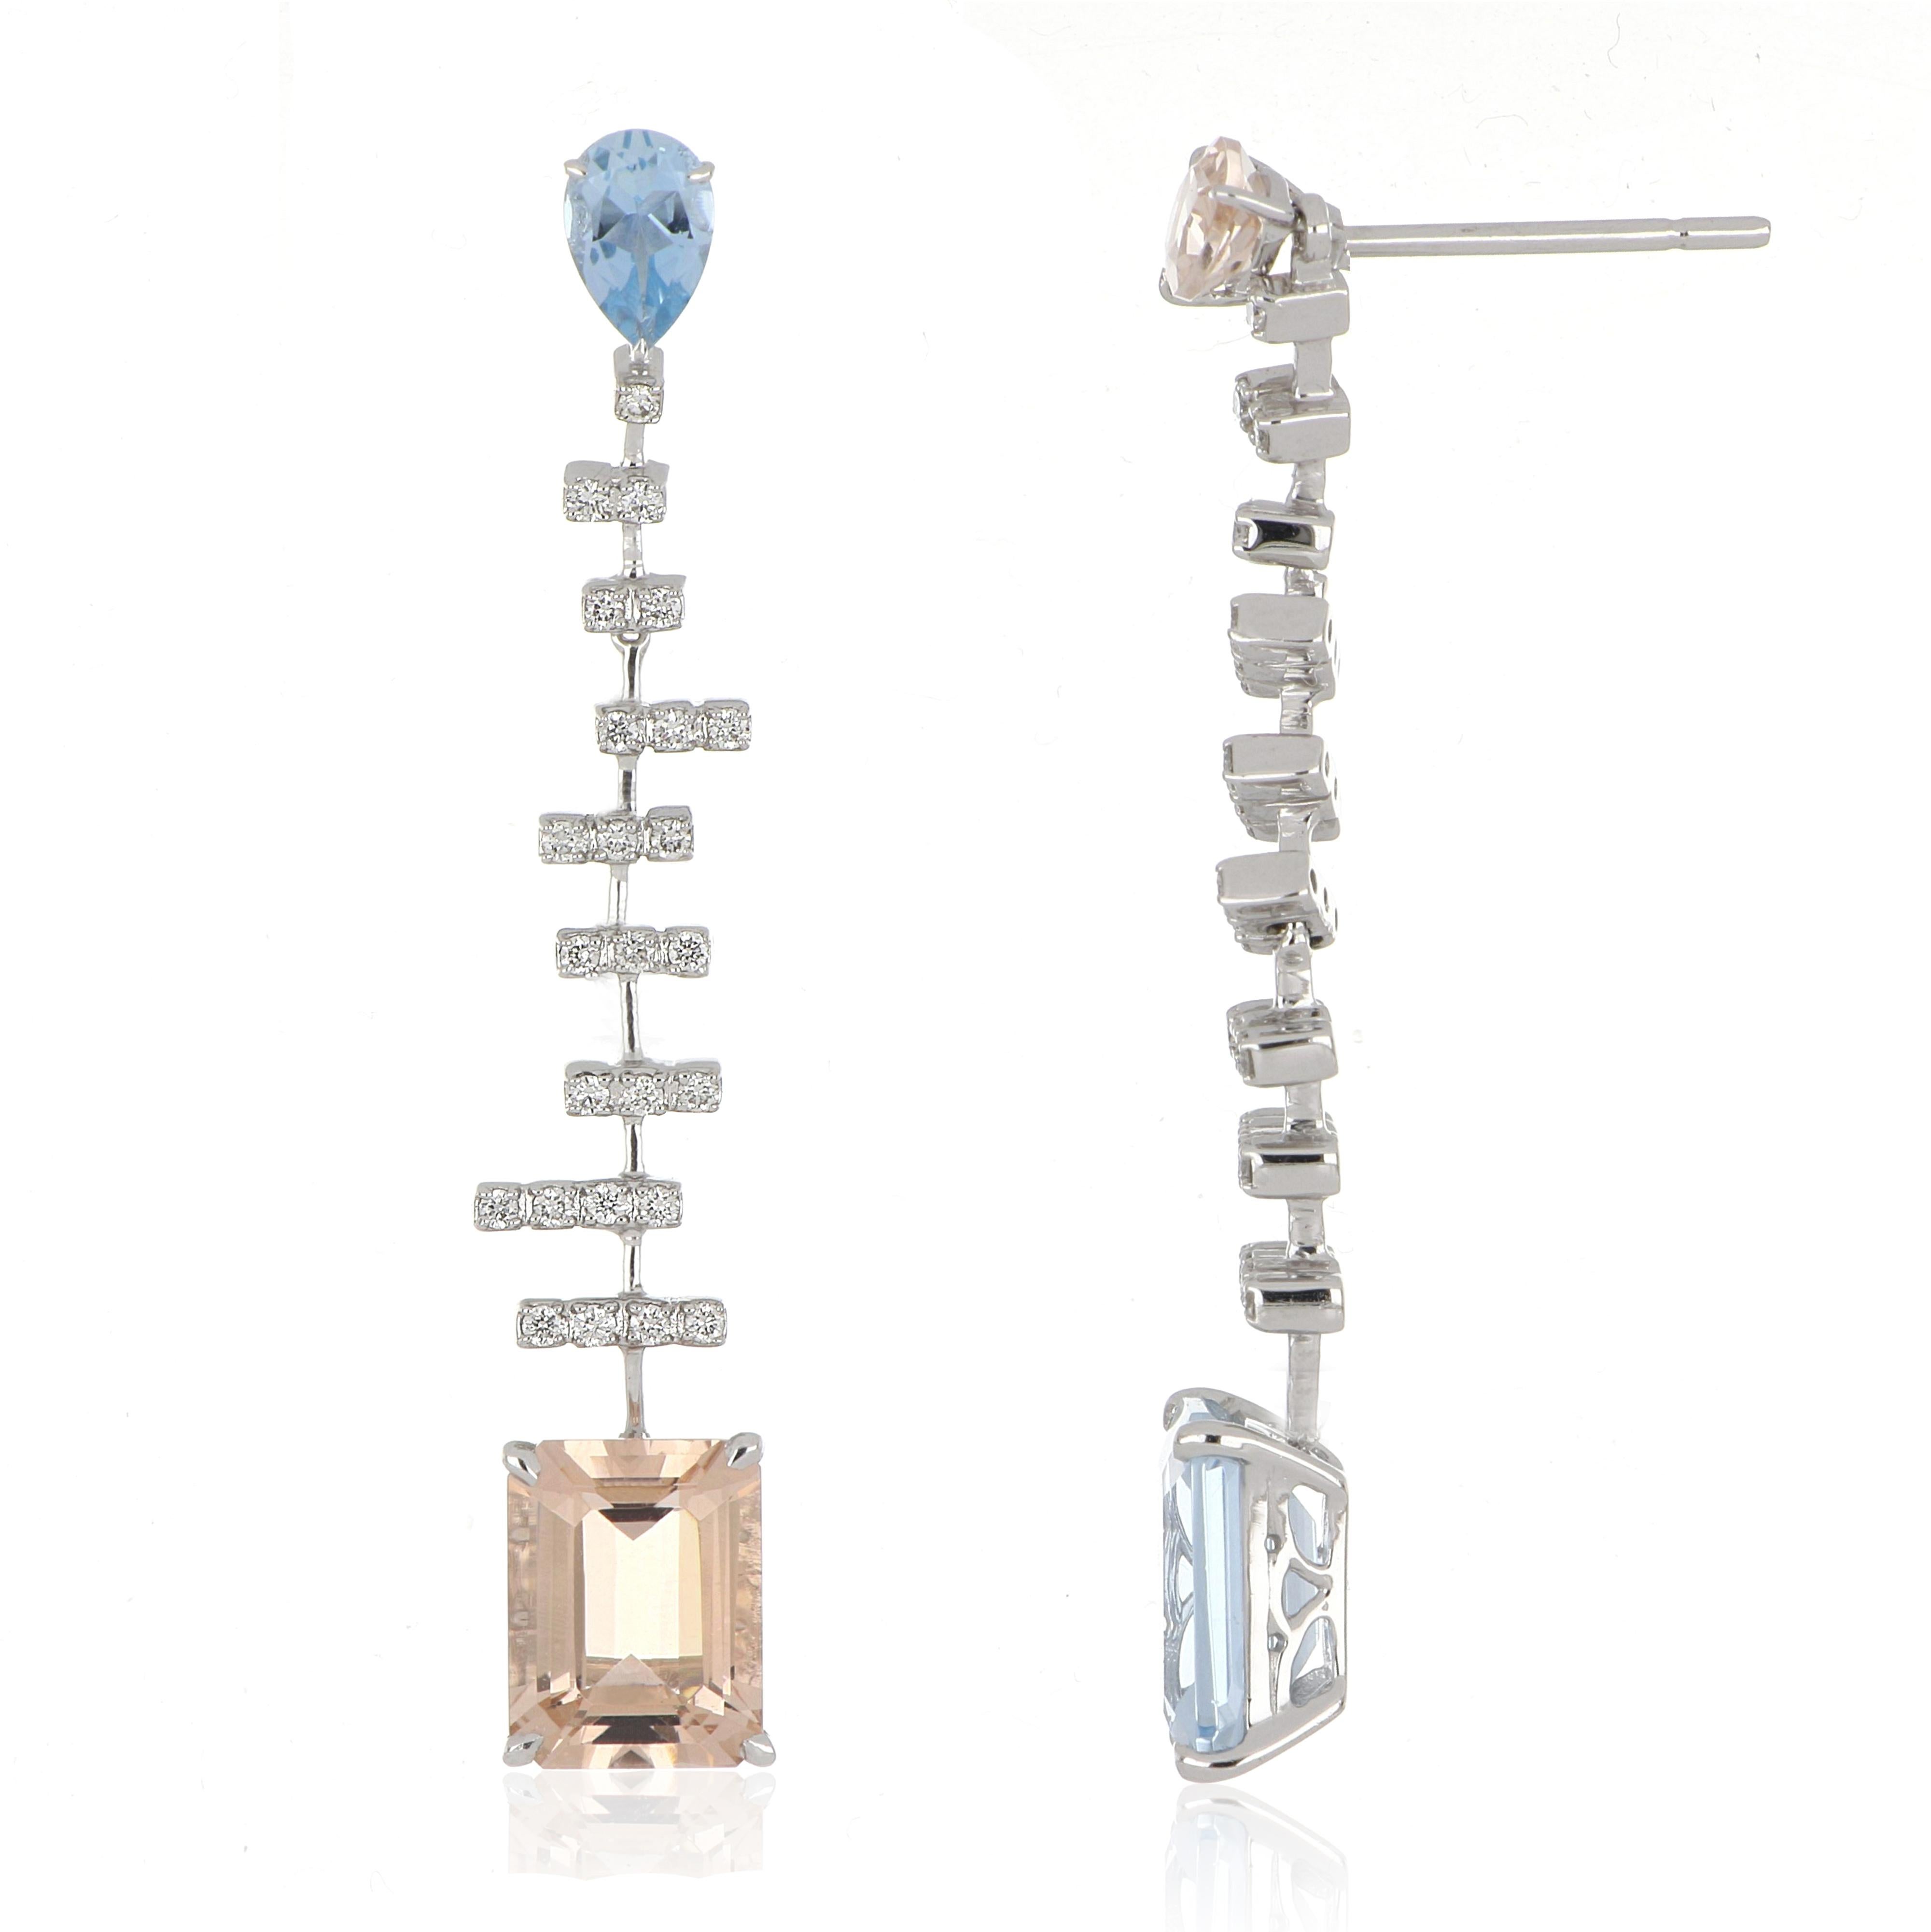 Elegant and Exquisitely detailed Mismatched Dangling Gold Earrings, set with 2.03 Ct (total ) Aquamarine, 2.37 Cts (total)  Morganite, accented with micro pave set Round Diamonds, weighing approx. 0.32 Cts. total carat weight.  Beautifully Hand